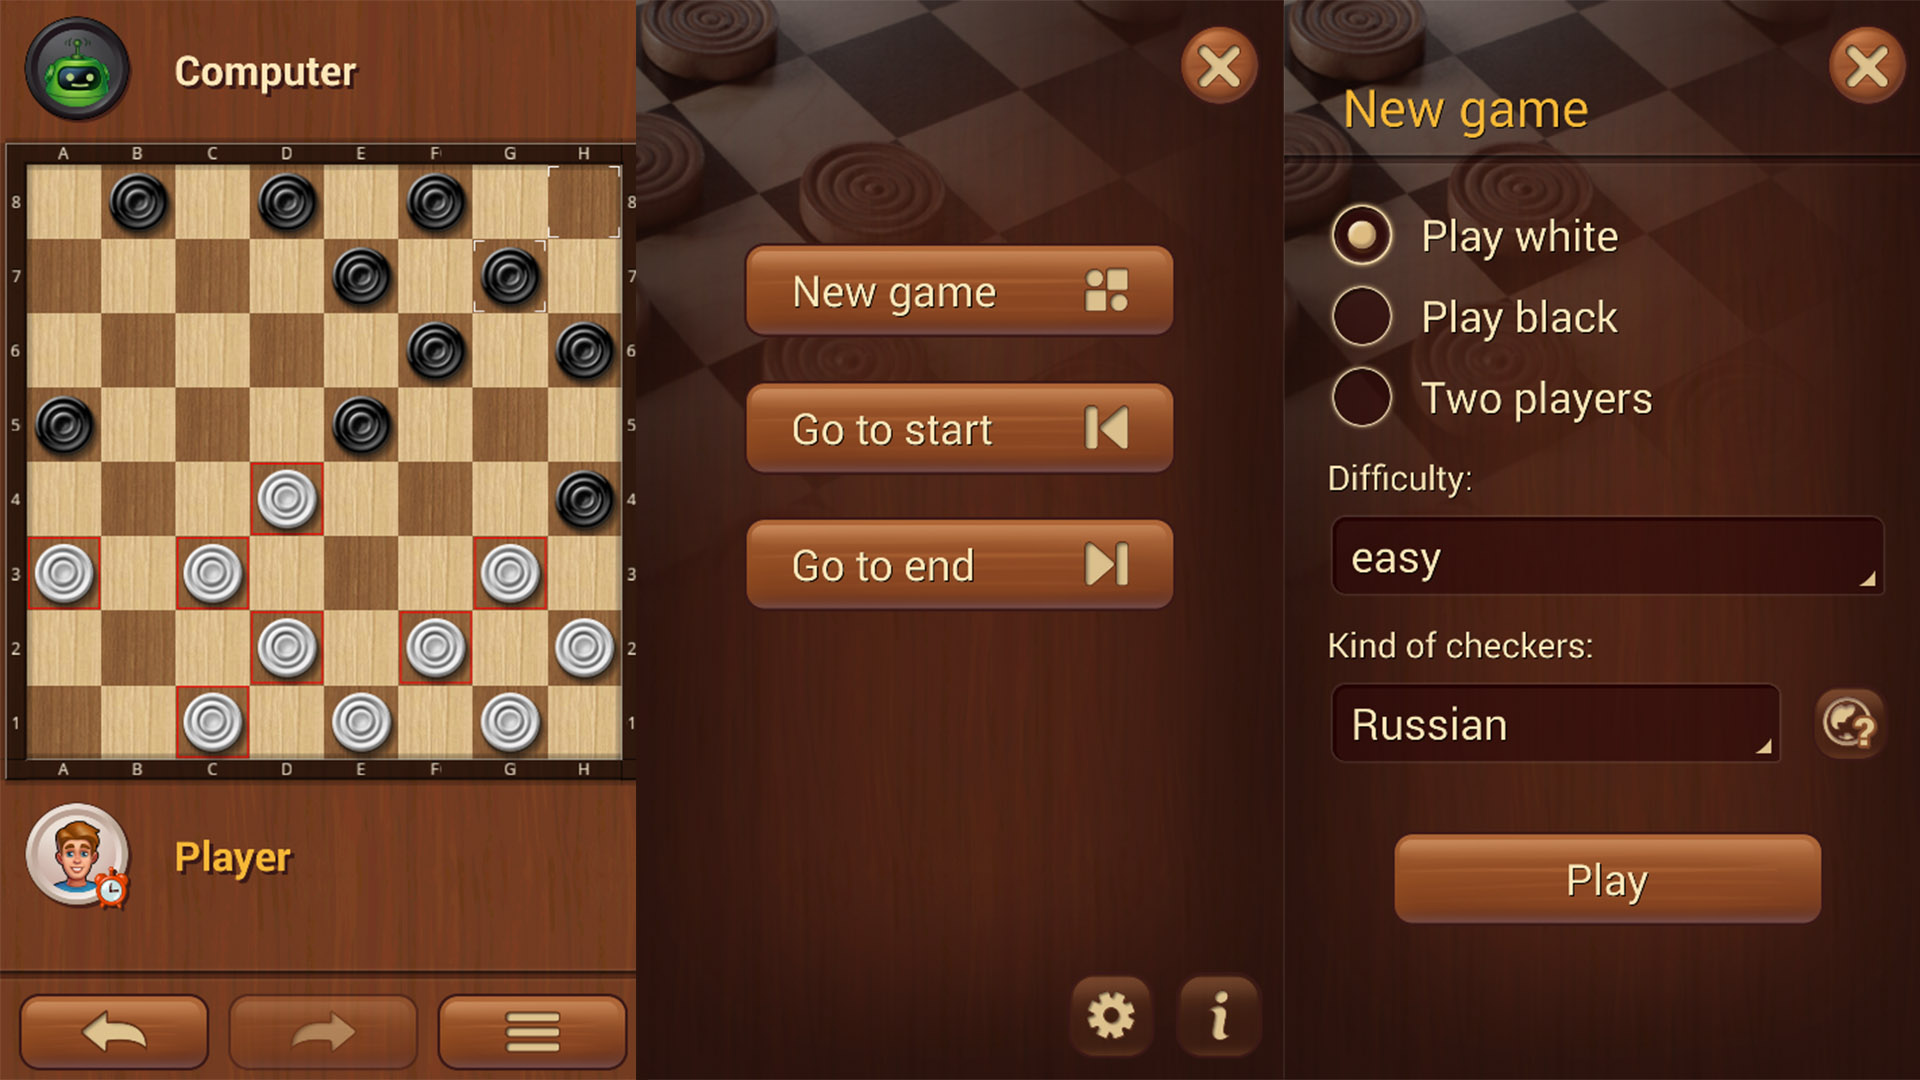 All In One Checkers screenshot 2021